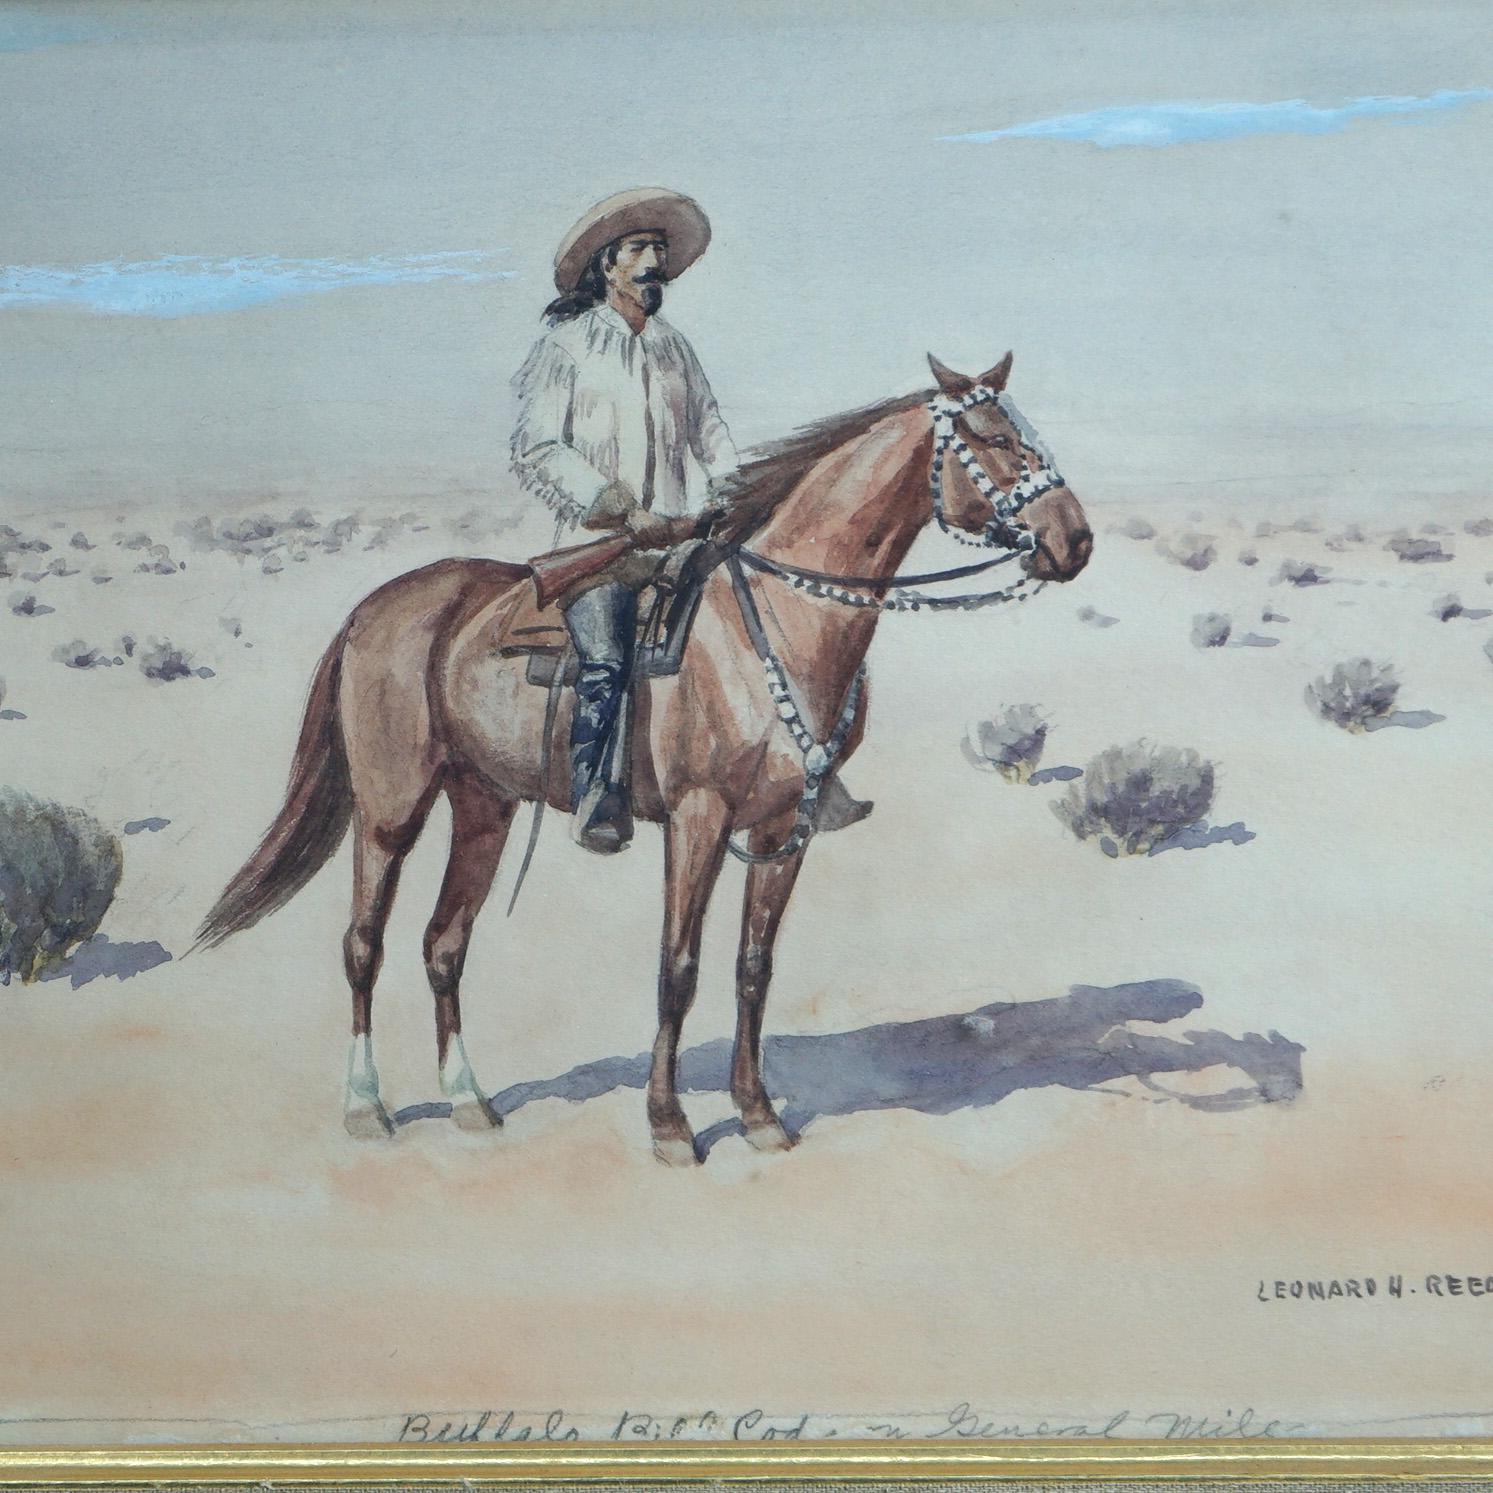 Hand-Painted Western Watercolor Desert Landscape Painting of Gen Miles by Leo. Reedy, 20th C